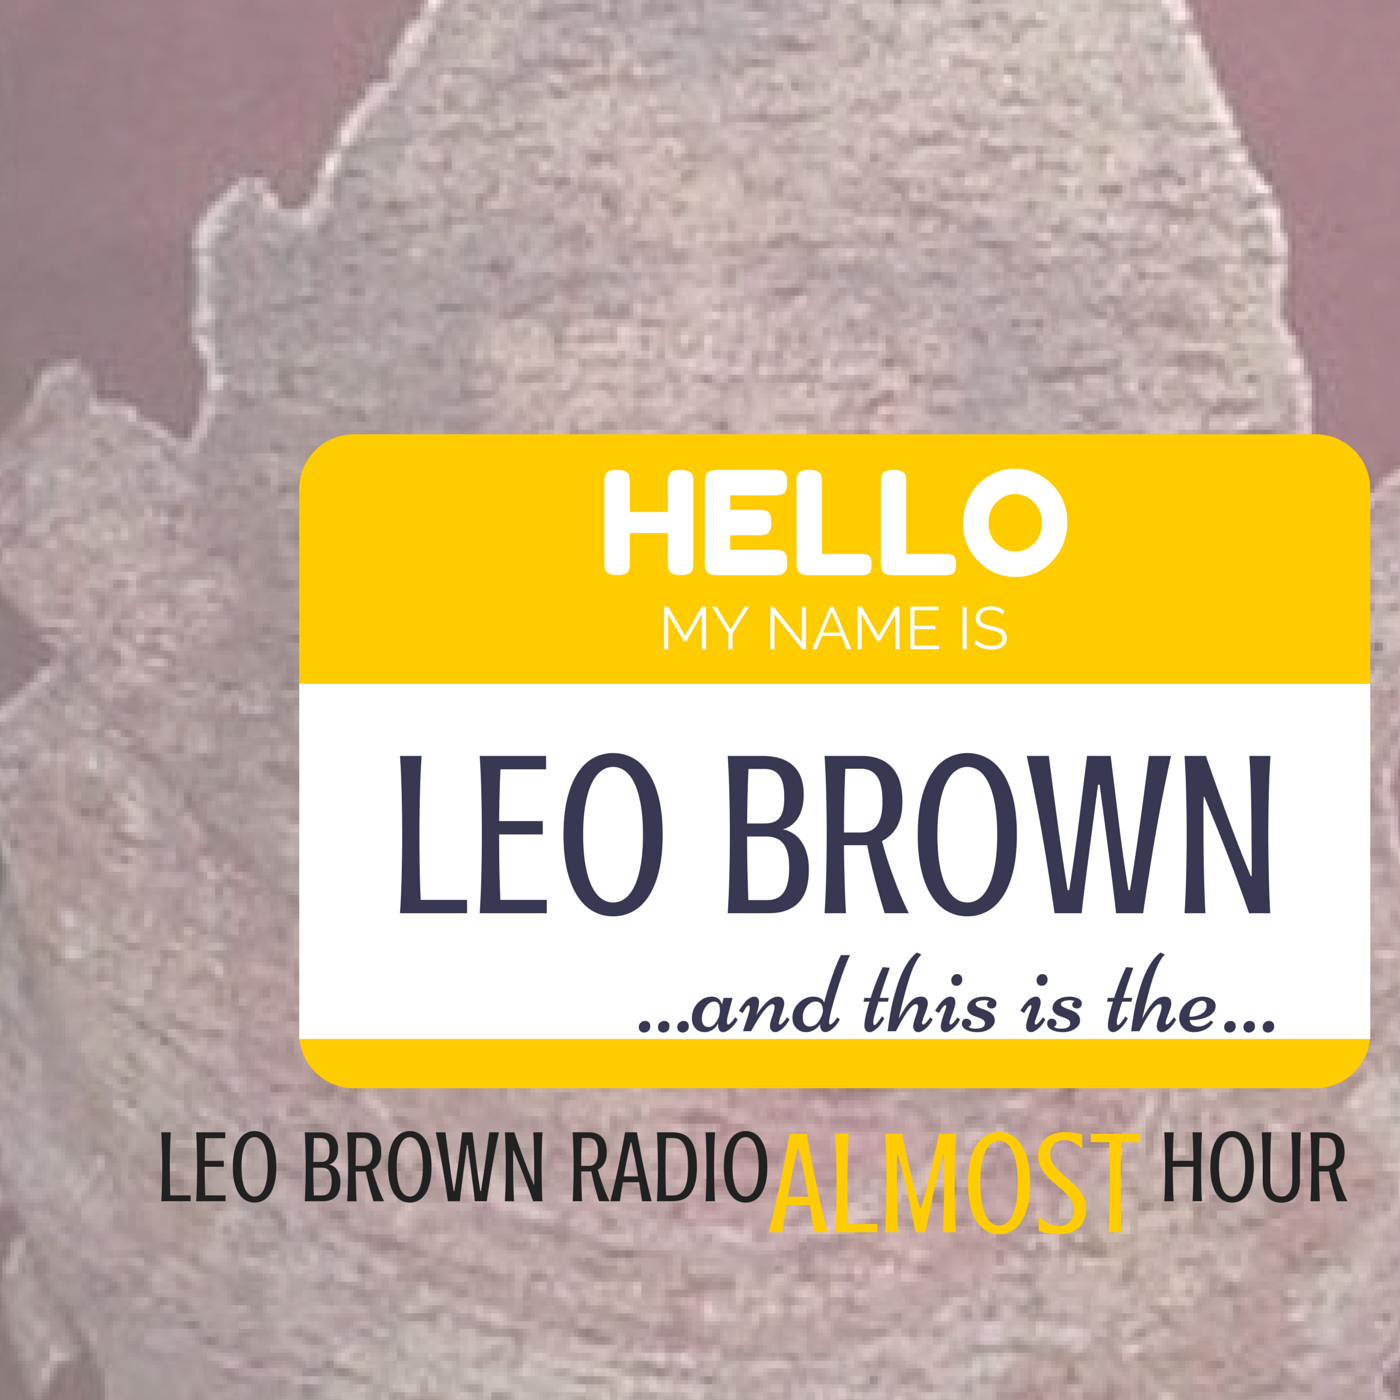 Leo Brown Almost Hour 02/20/17